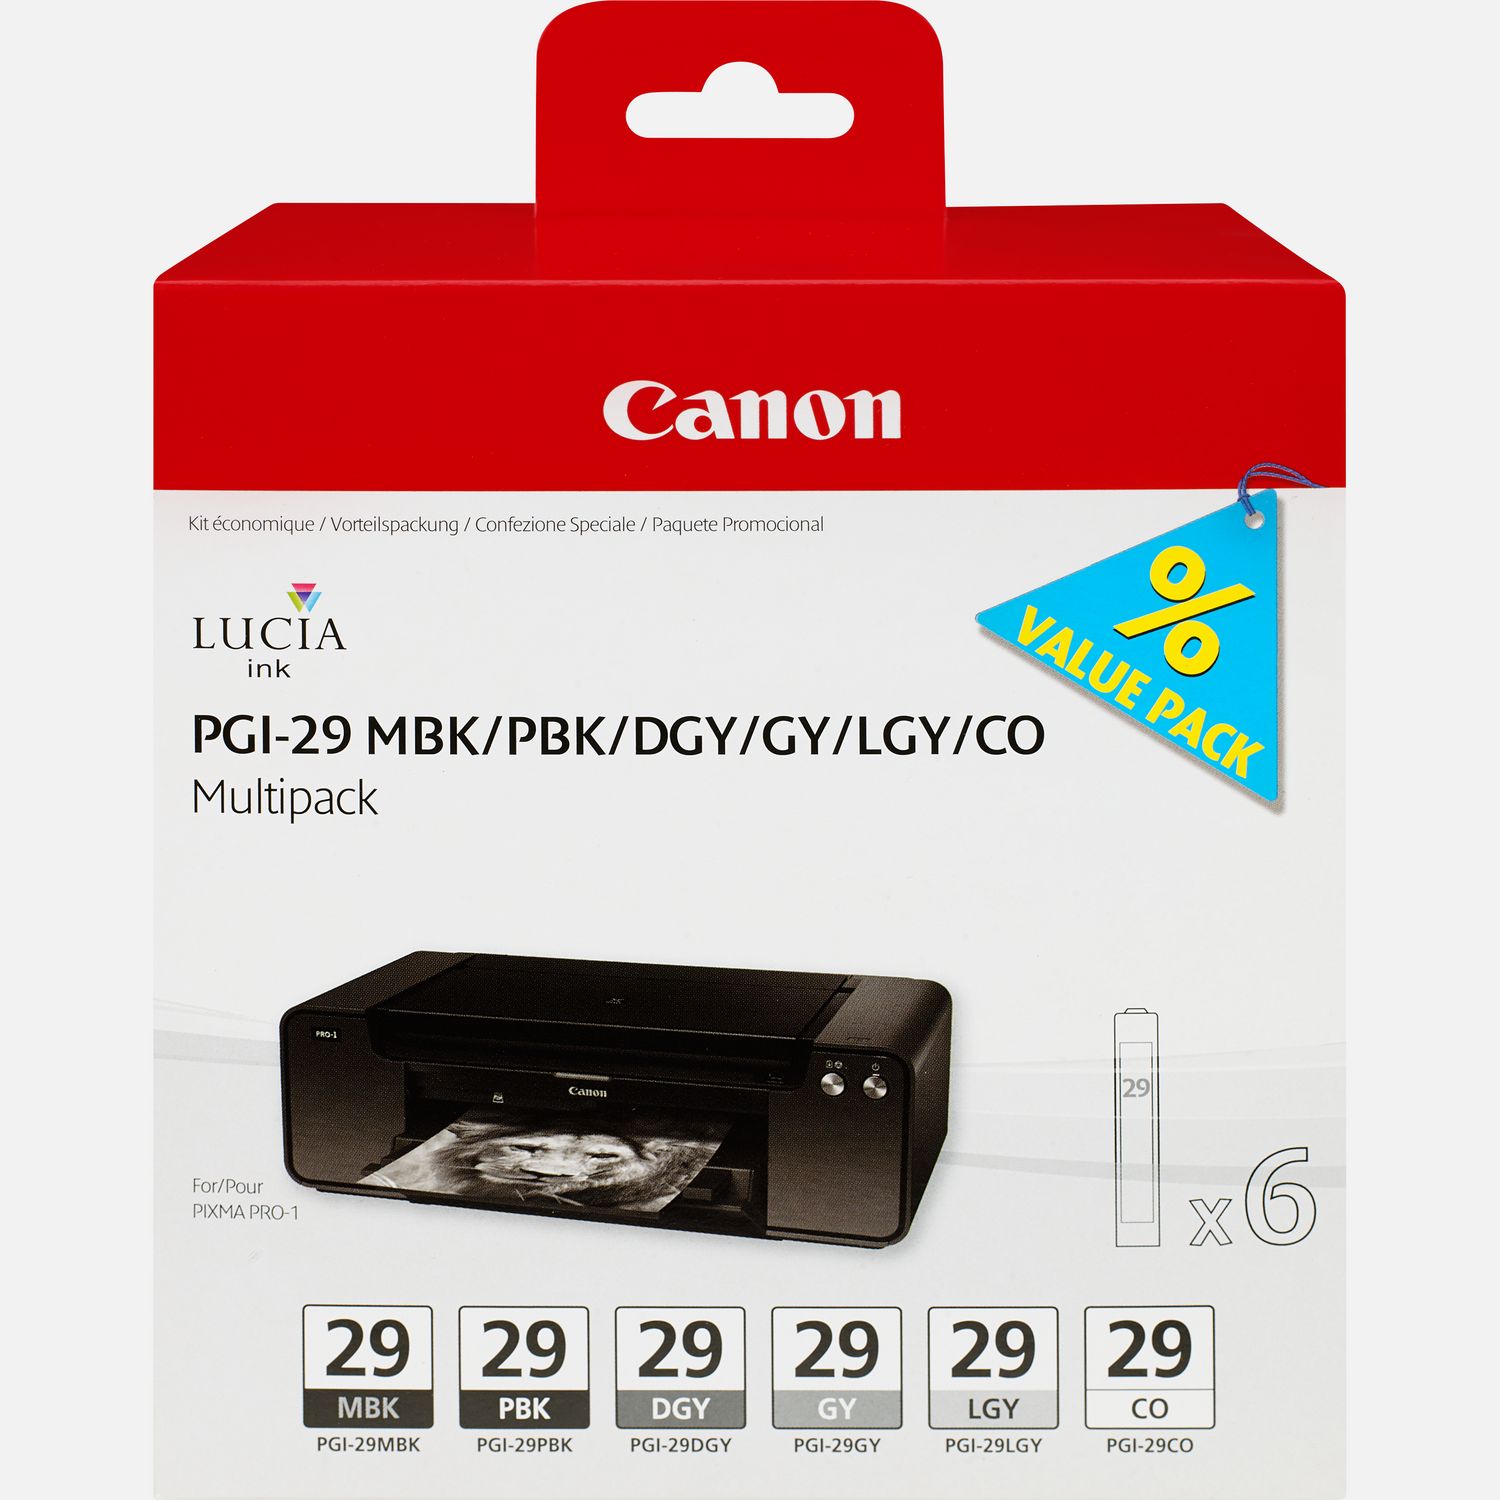 Image of 6 Cartucce Inkjet Multipack Canon PGI-29 MBK/PBK/DGY/GY/LGY/CO